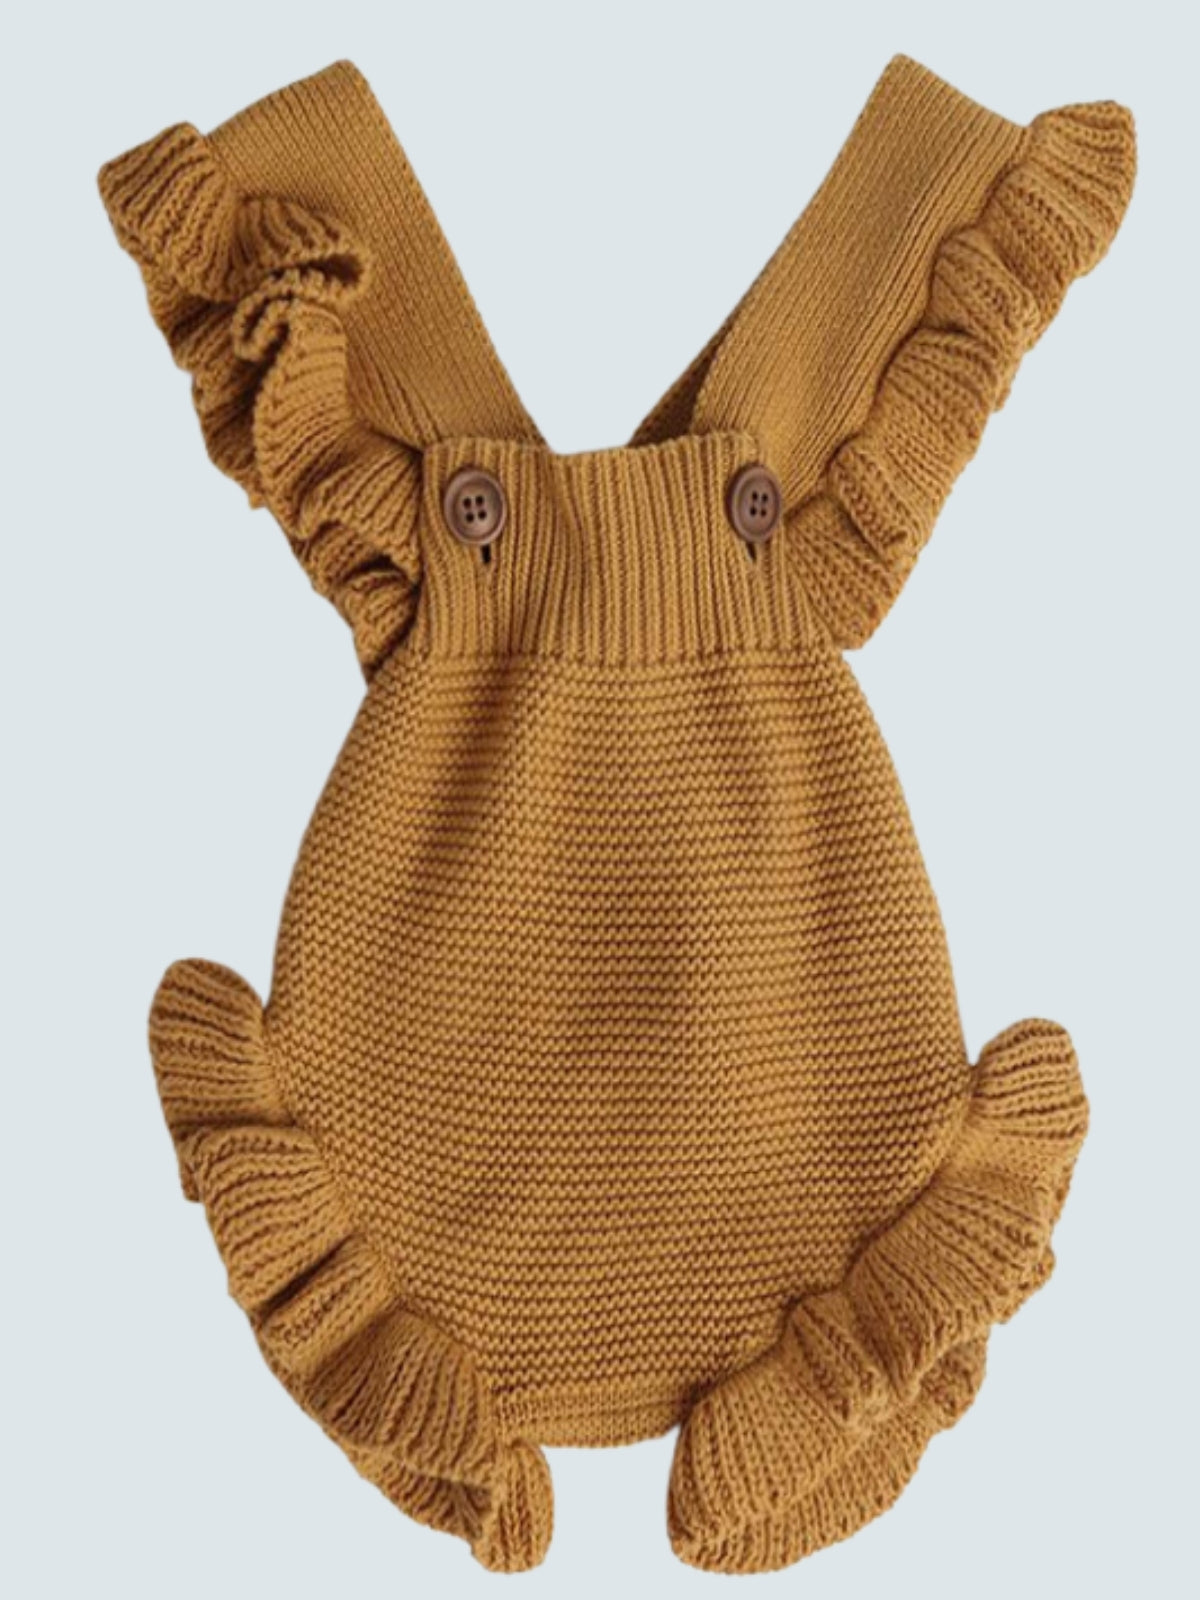 Baby Knice Knit Overall Style Romper Onesie